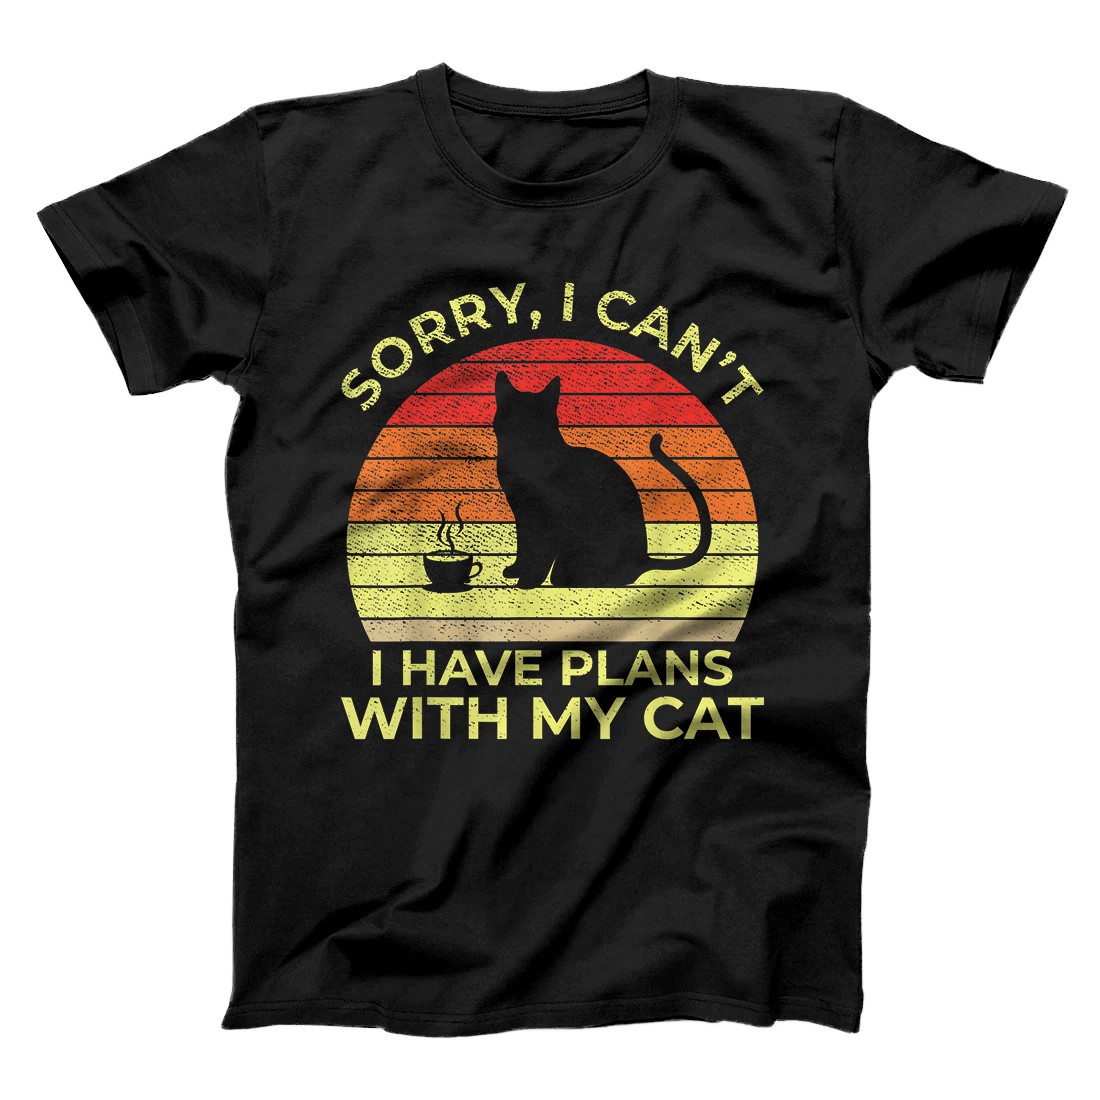 Personalized Sorry I Can't I Have Plans With My Cat Funny Pet Cat Lover T-Shirt